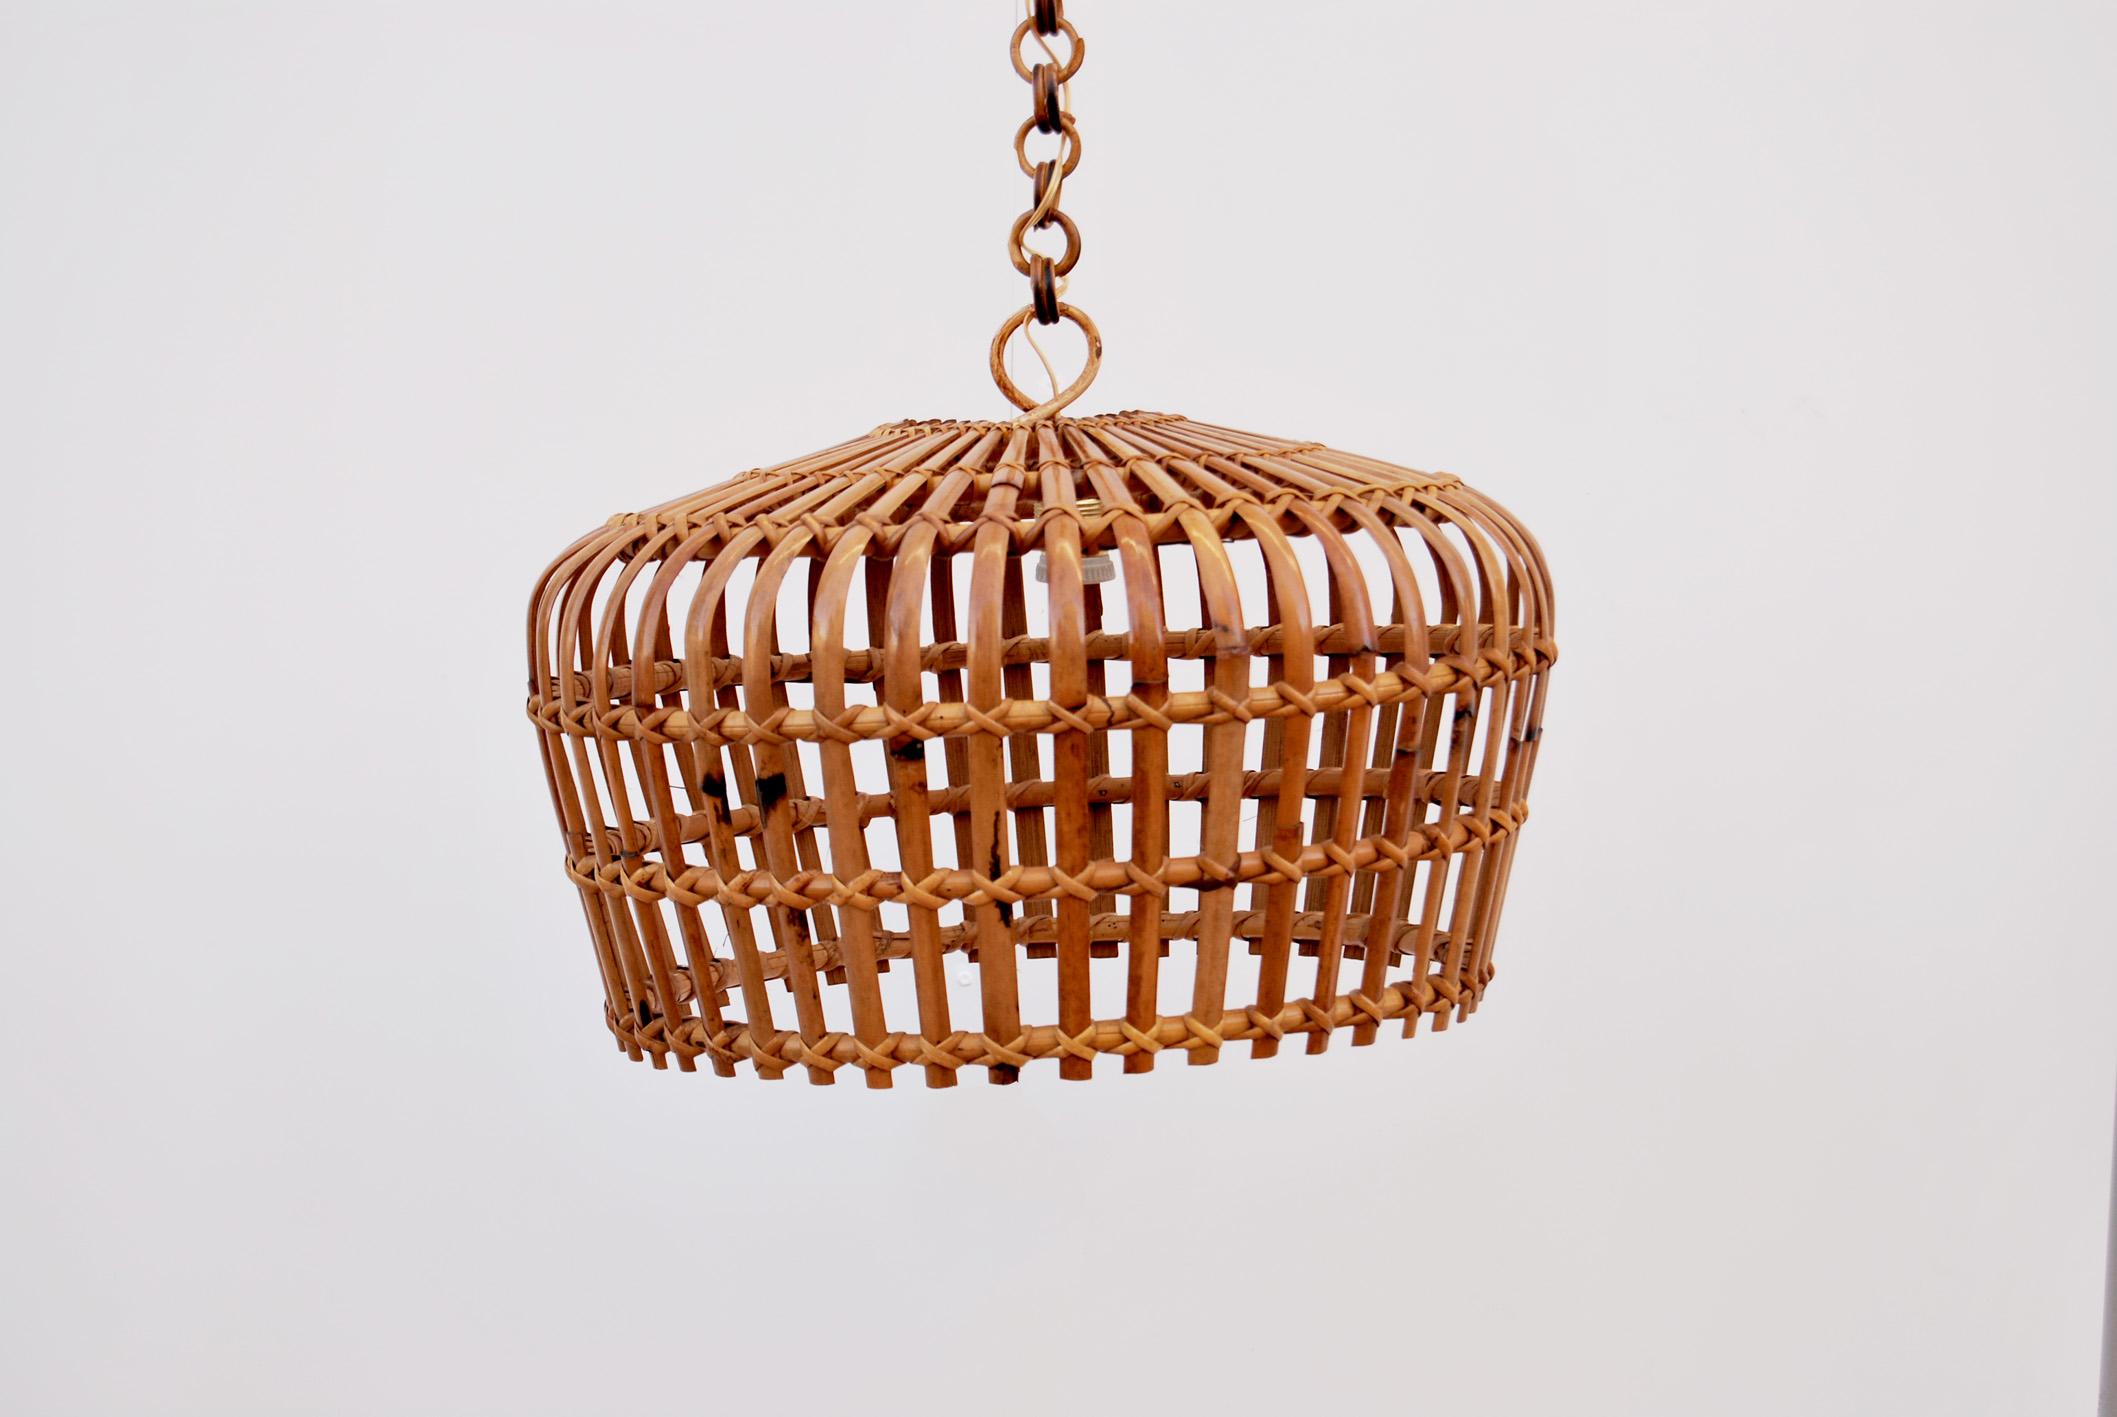 Beautiful round bamboo and wicker hanging chandelier, 1960s, Made in Italy. 
The chandelier consists of an entirely handcrafted curved rattan shade, and the chain is composed of round rattan links, which can be adjusted in height. The chandelier has